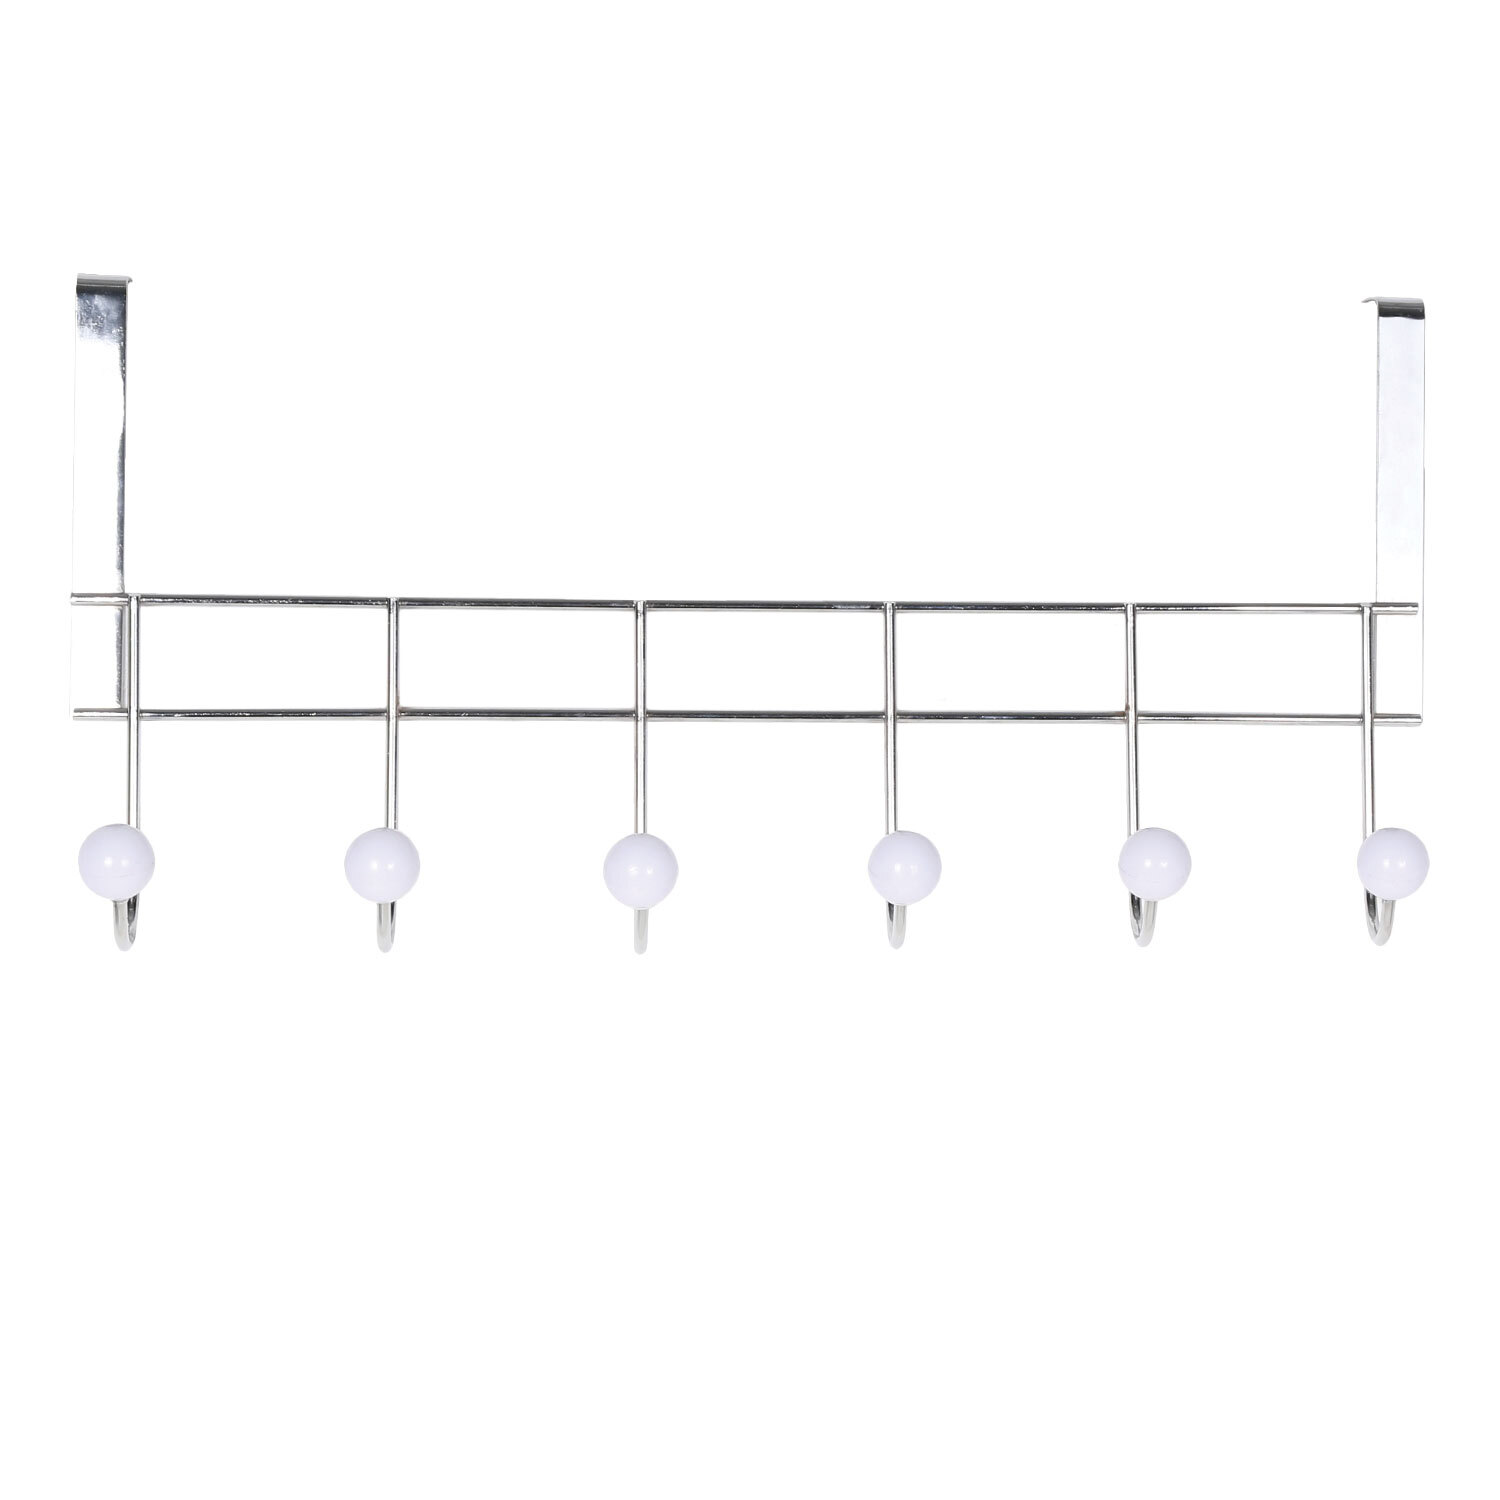 Decorails Silver and Chrome 6 Hook Hanging Rail Image